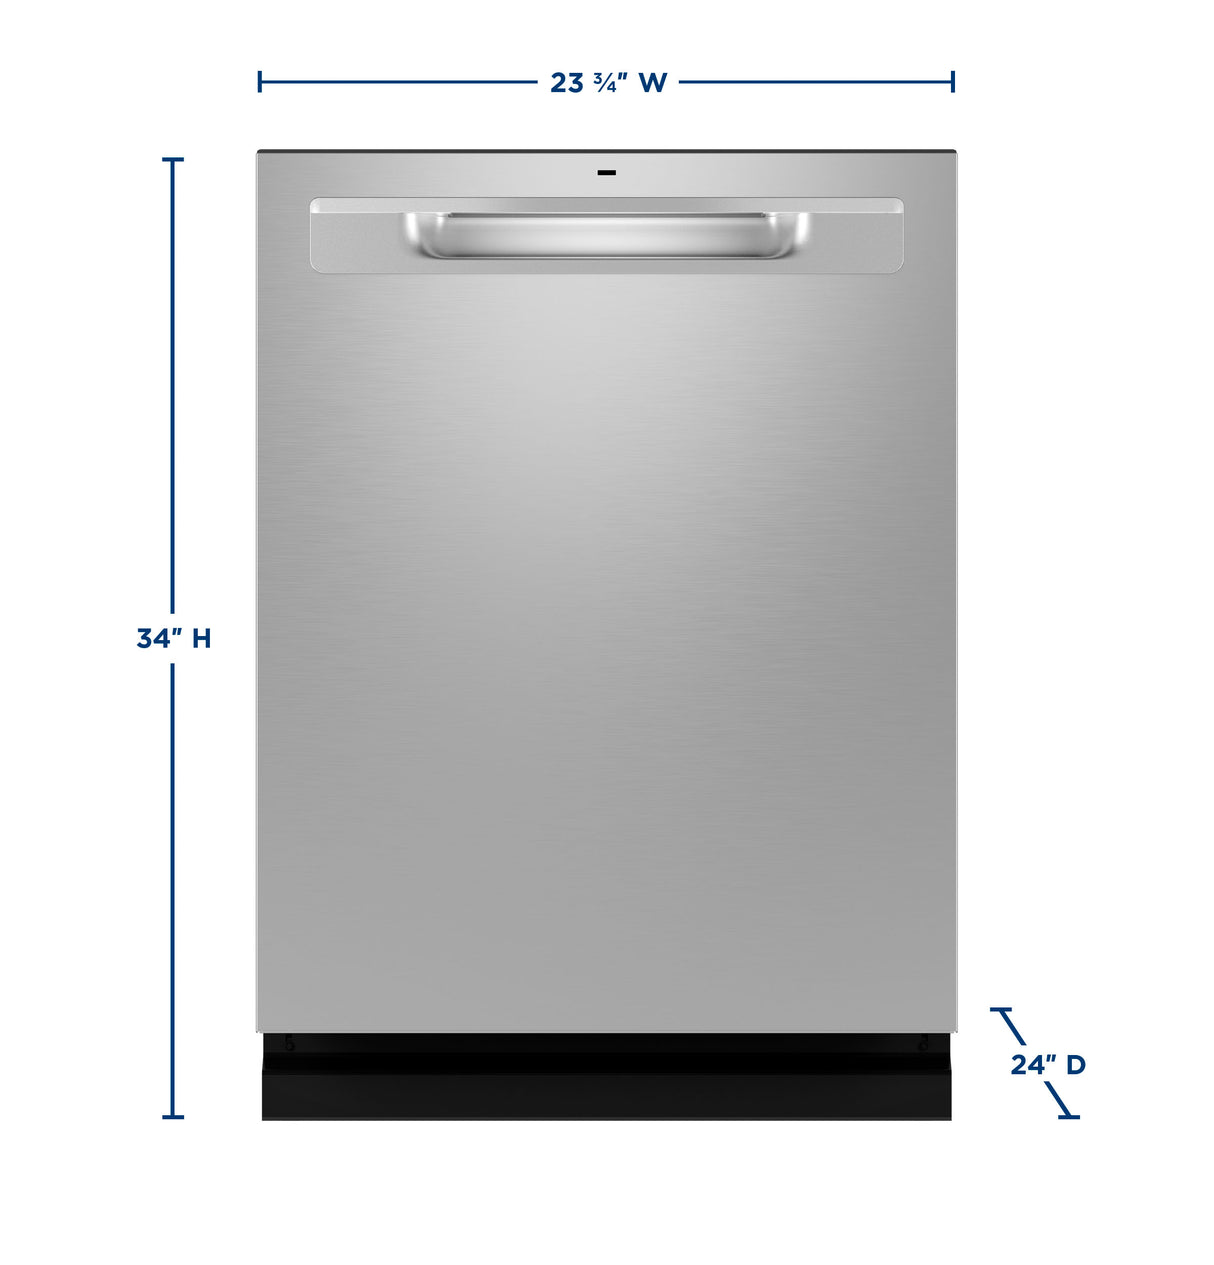 GE(R) ENERGY STAR(R) Fingerprint Resistant Top Control with Stainless Steel Interior Dishwasher with Sanitize Cycle - (GDP670SYVFS)